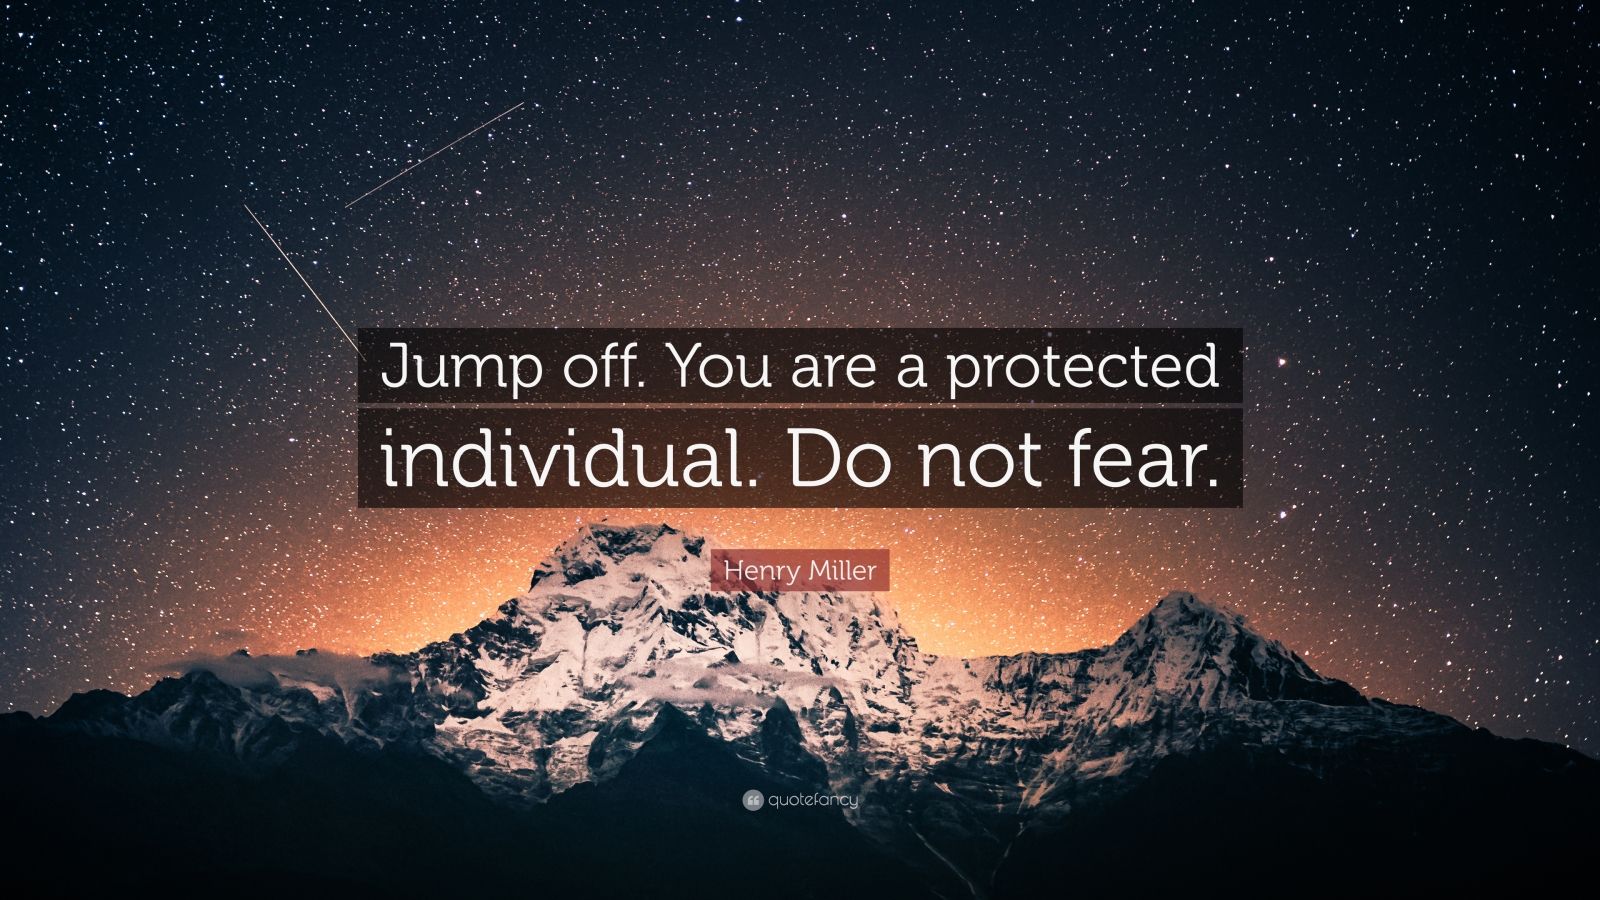 Henry Miller Quote: “Jump off. You are a protected individual. Do not fear.”